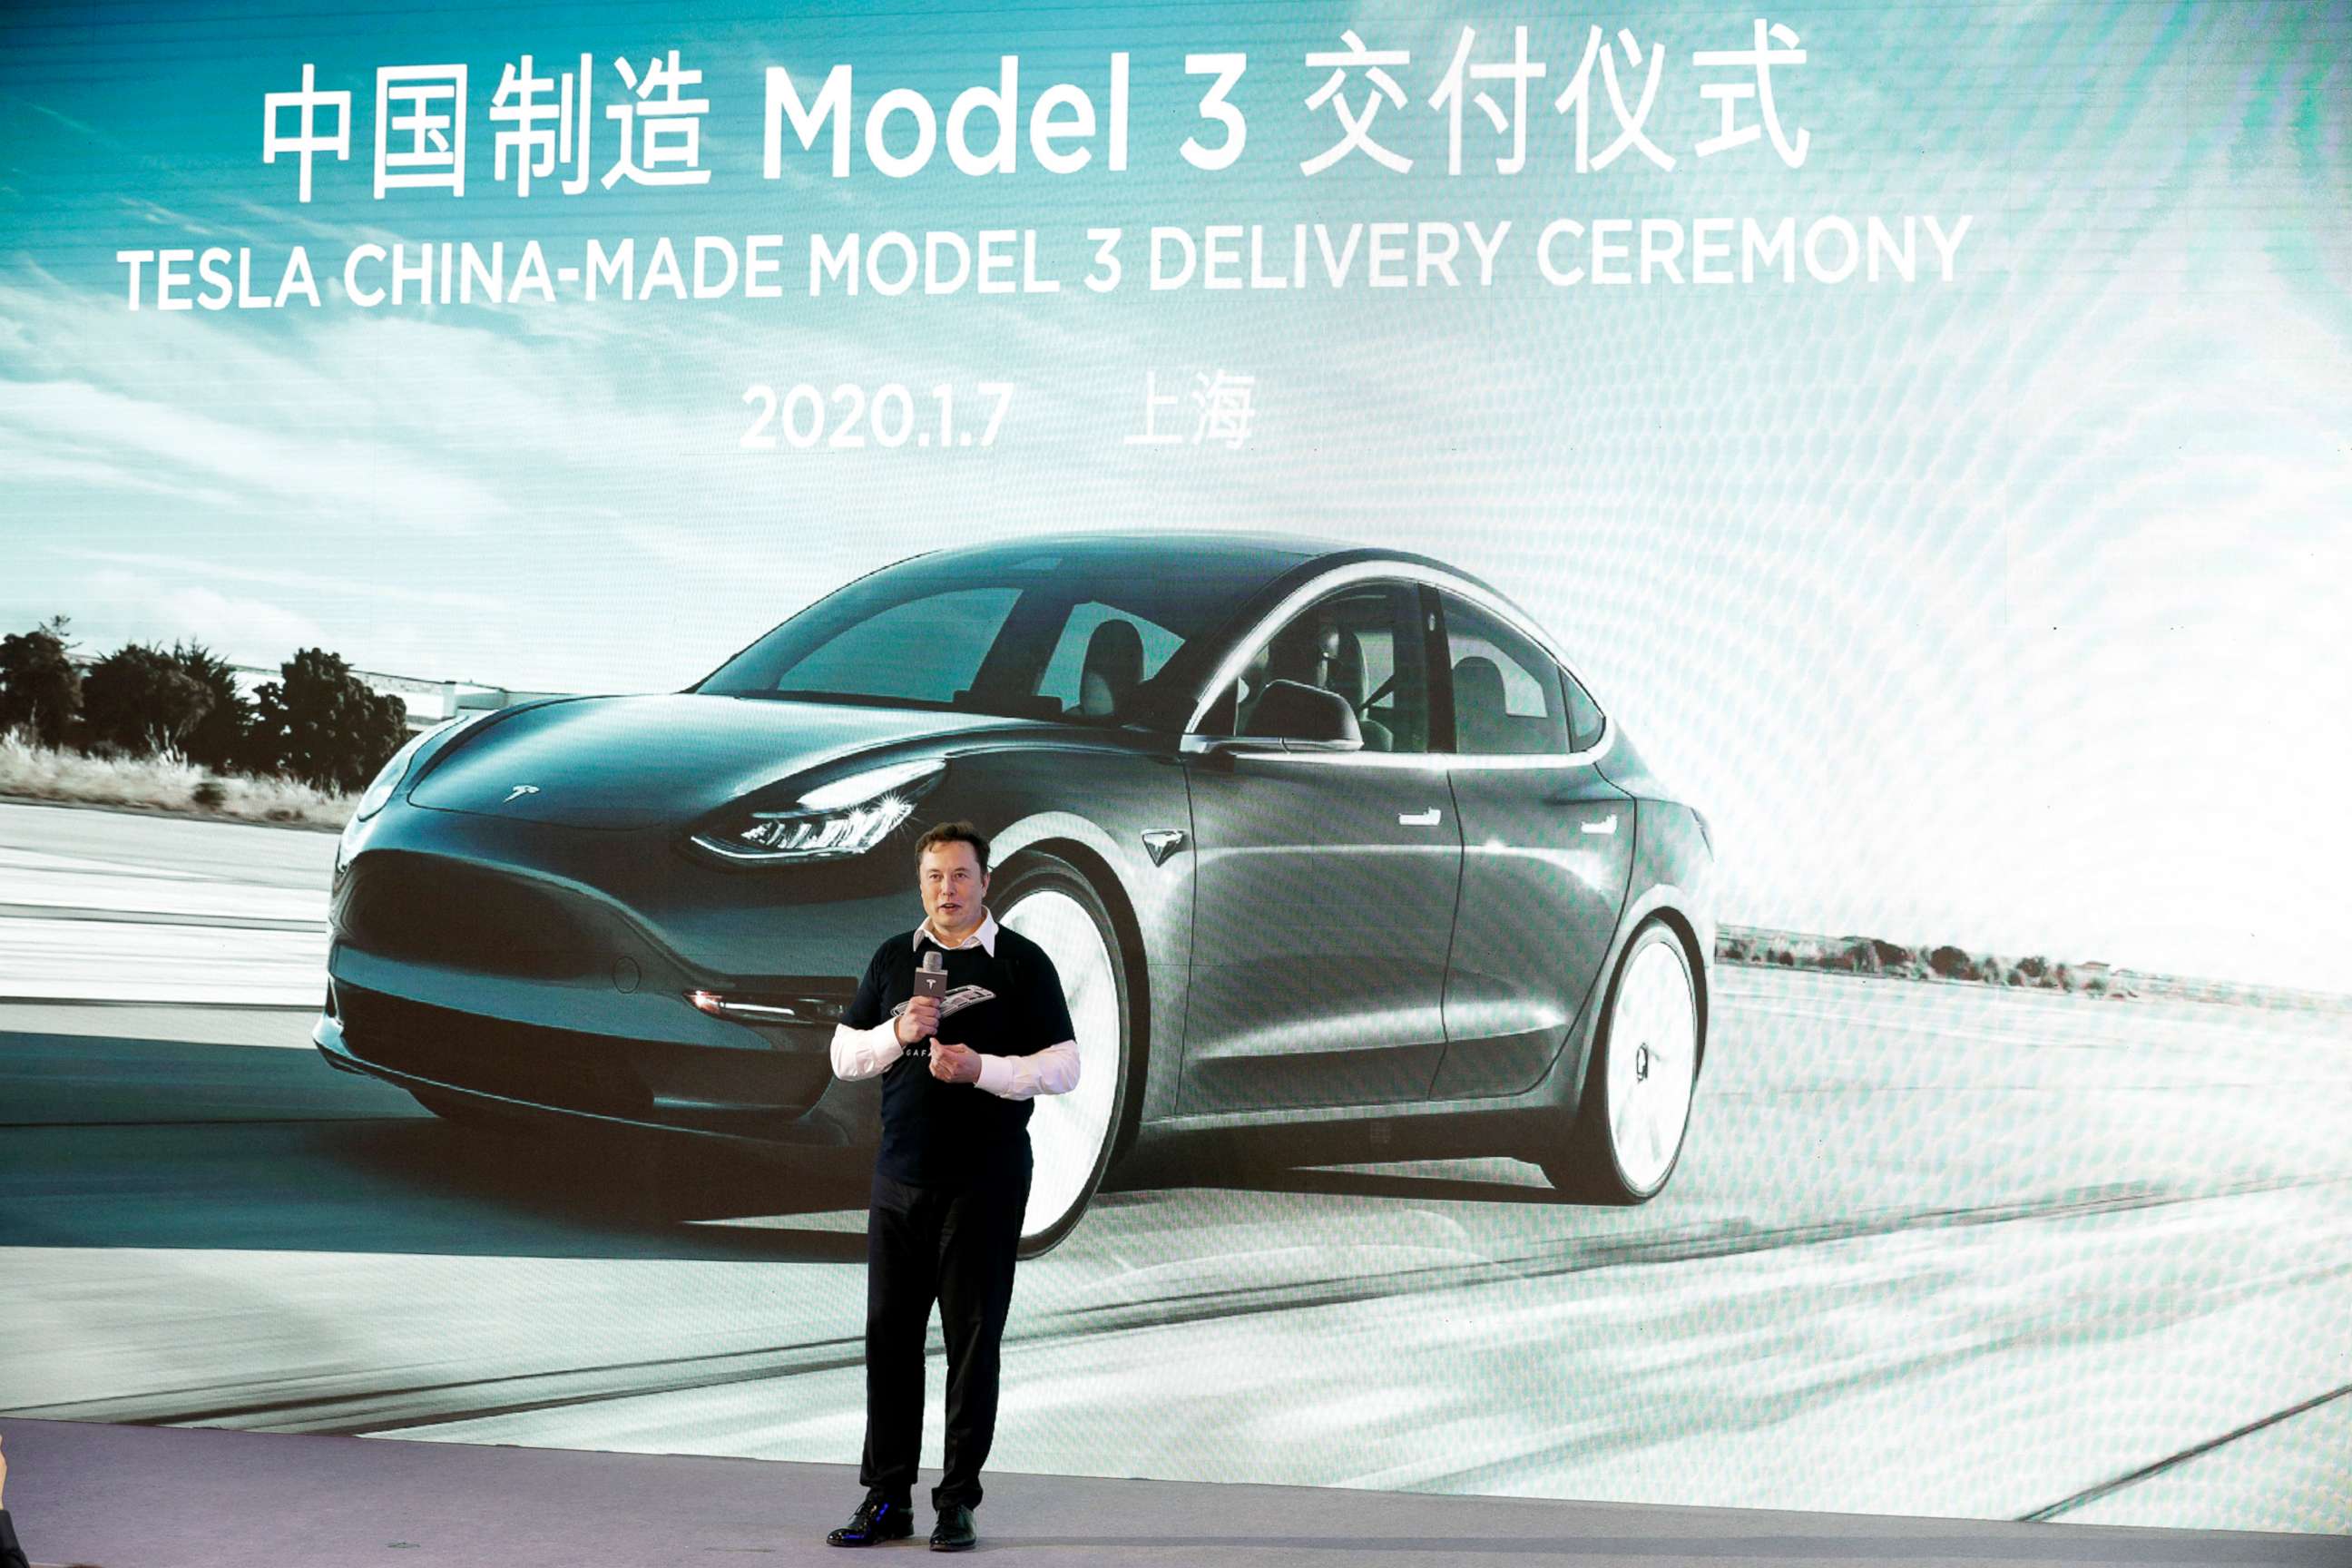 PHOTO: Elon Musk speaks during the Tesla China-Made Model 3 Delivery Ceremony at the company's Gigafactory in Shanghai, Jan. 7, 2020.